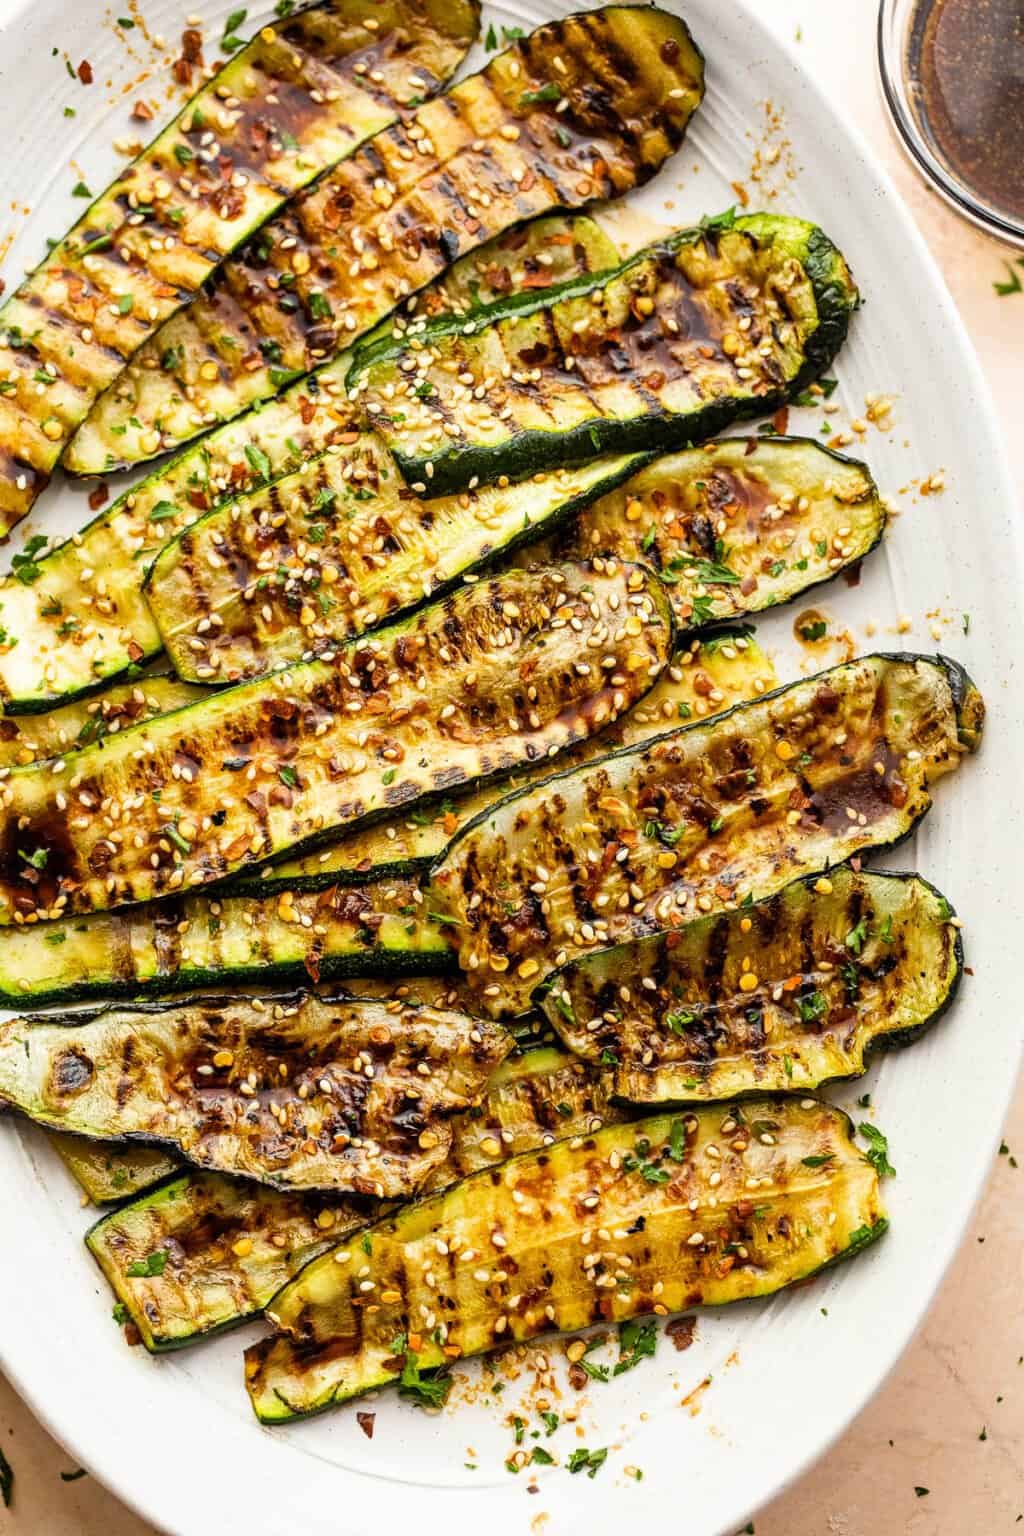 Grilled Zucchini with Sesame Soy Glaze | Diethood